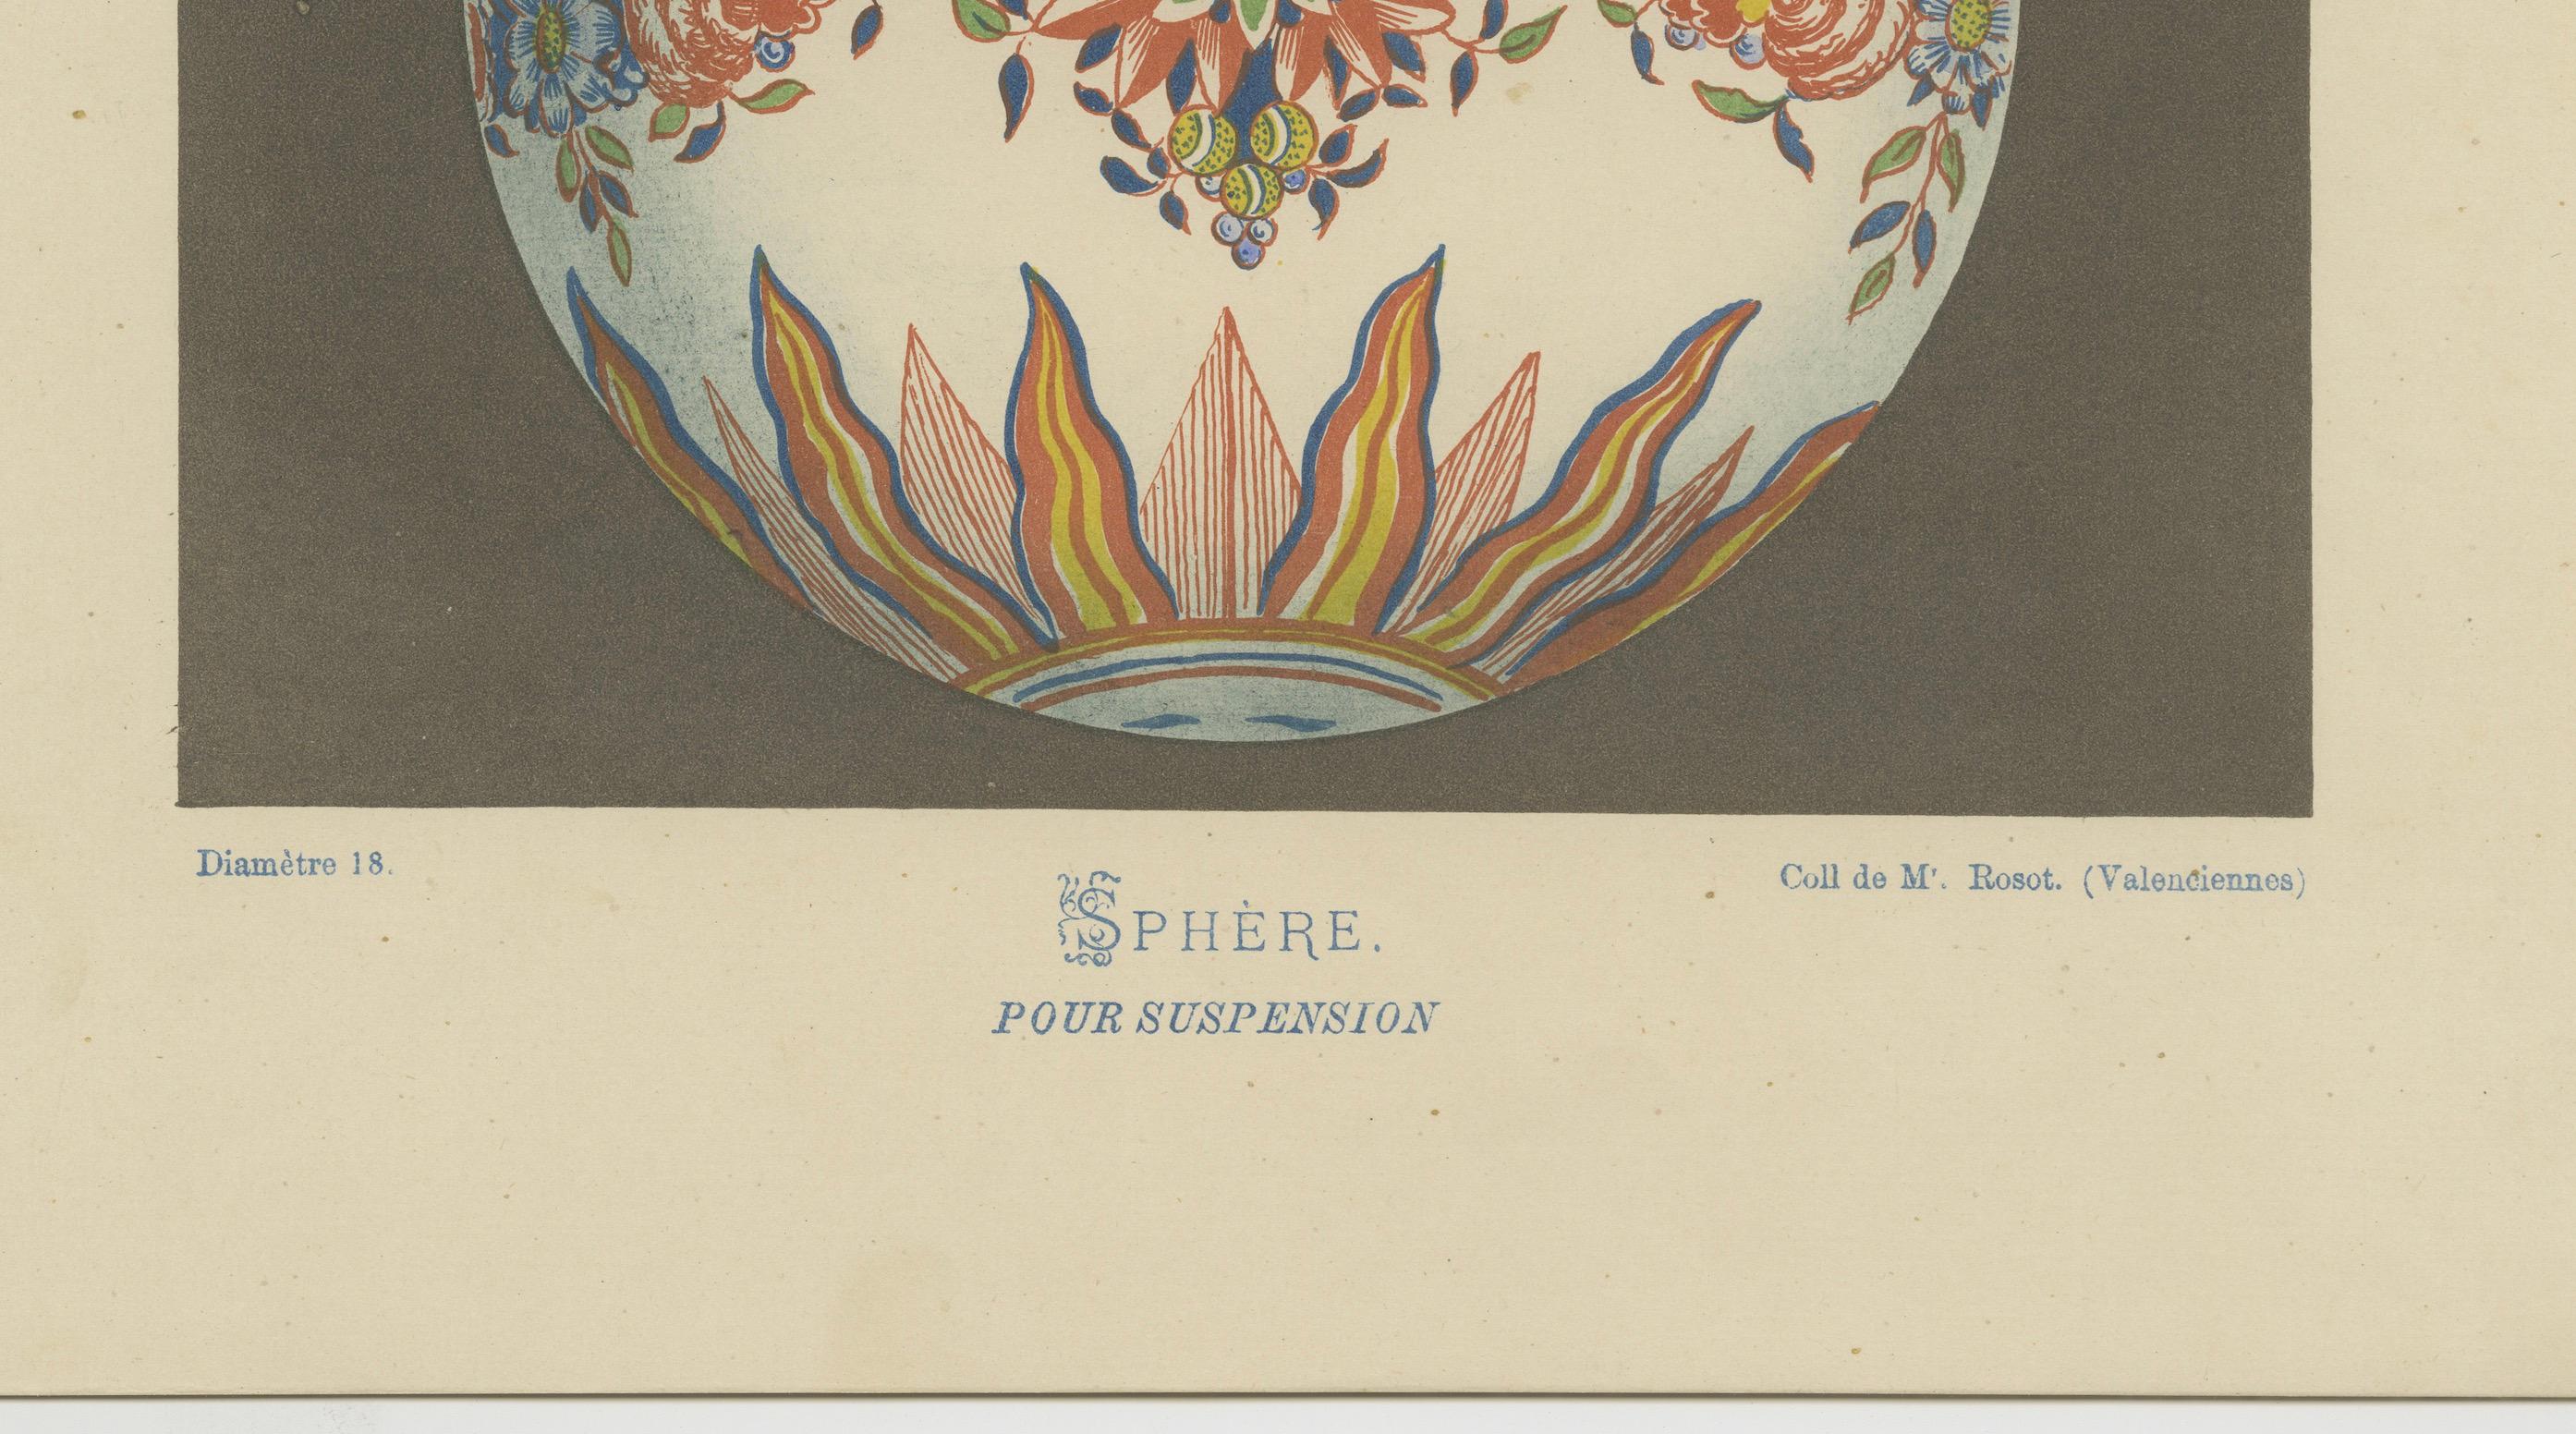 Splendor and Abundance: Sinceny Ceramic Plates - Chromolithograph Plate 74

This is a chromolithograph of ceramic plates from Sinceny, a region known for its earthenware. The print, Plate 74, features two distinct designs: the upper plate is adorned